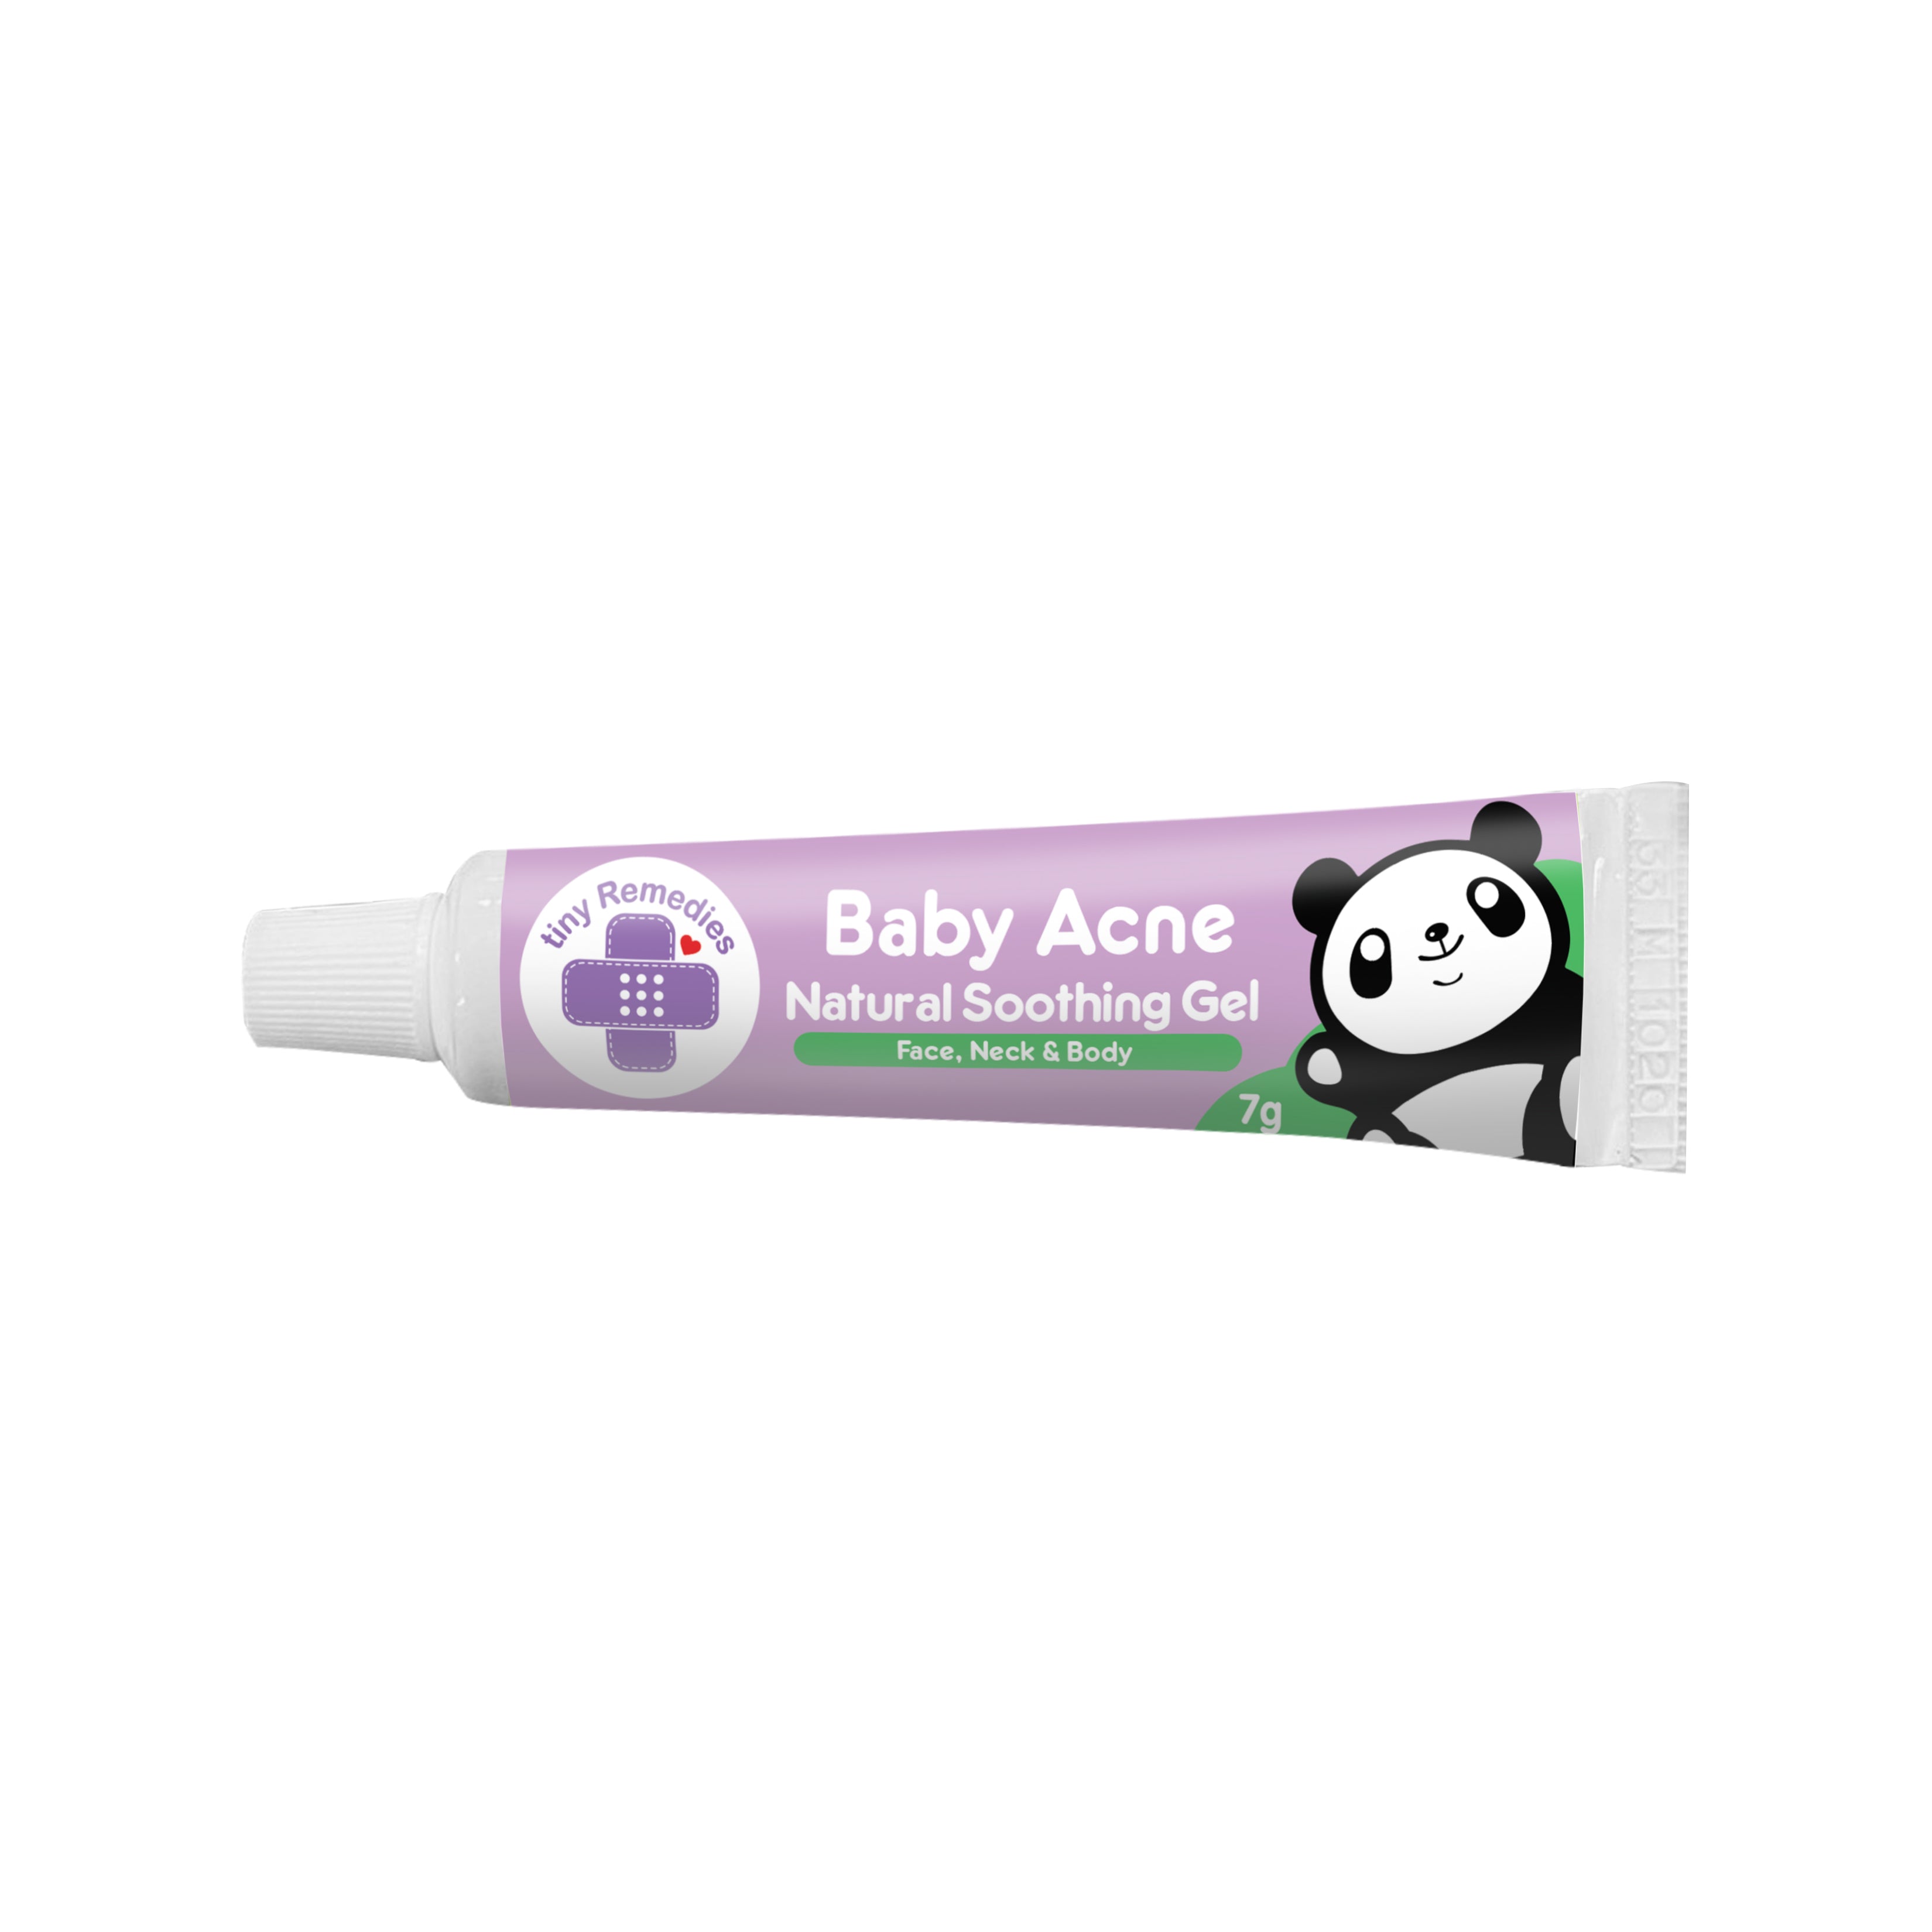 Tiny Buds Mini Baby Acne Natural Soothing Gel